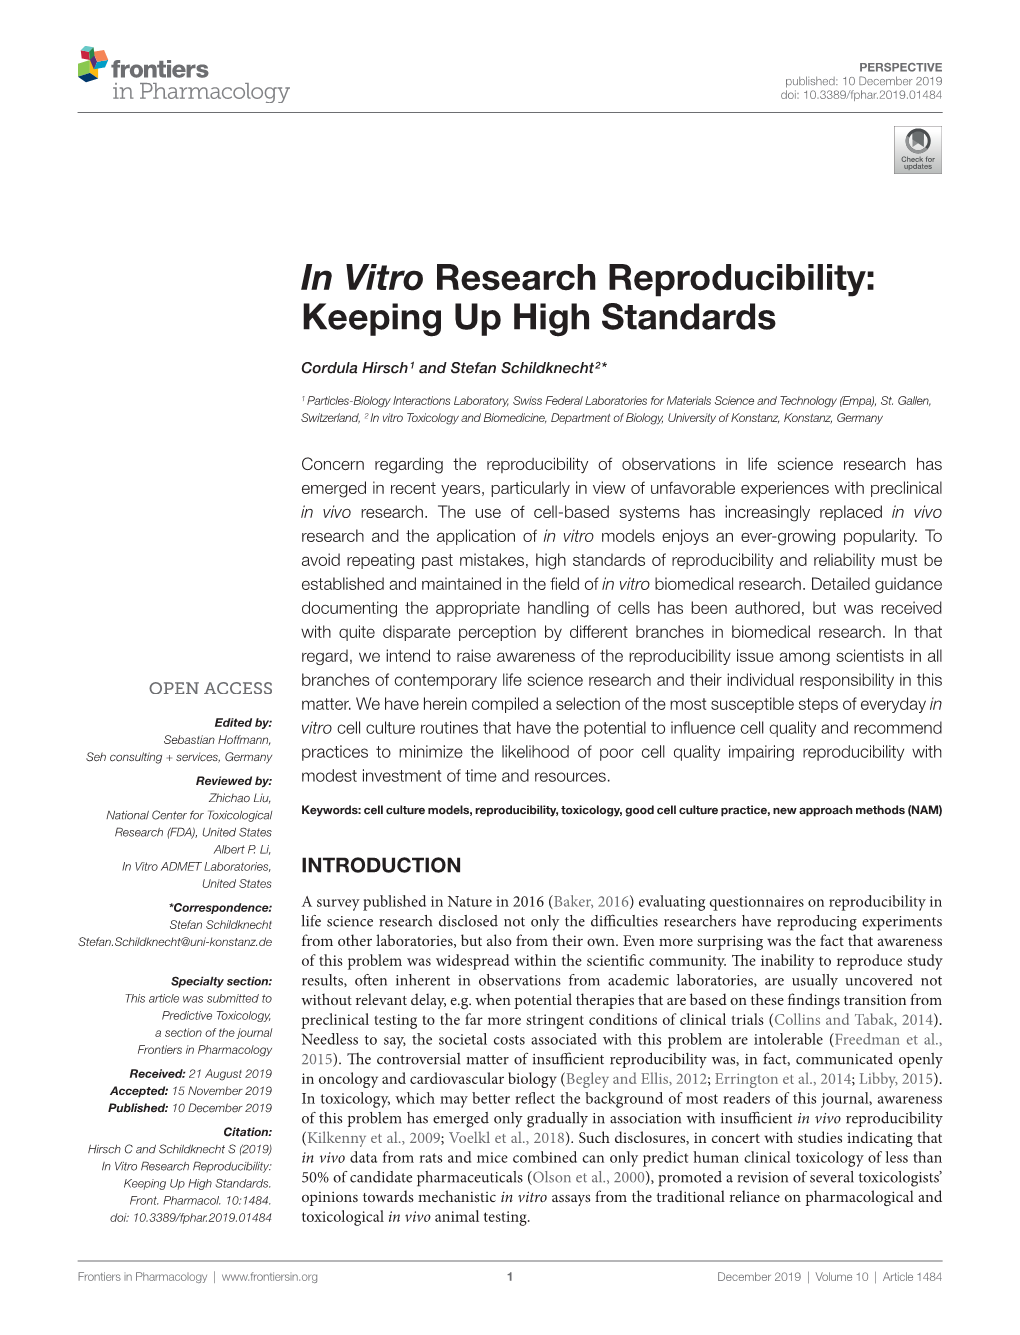 In Vitro Research Reproducibility: Keeping up High Standards